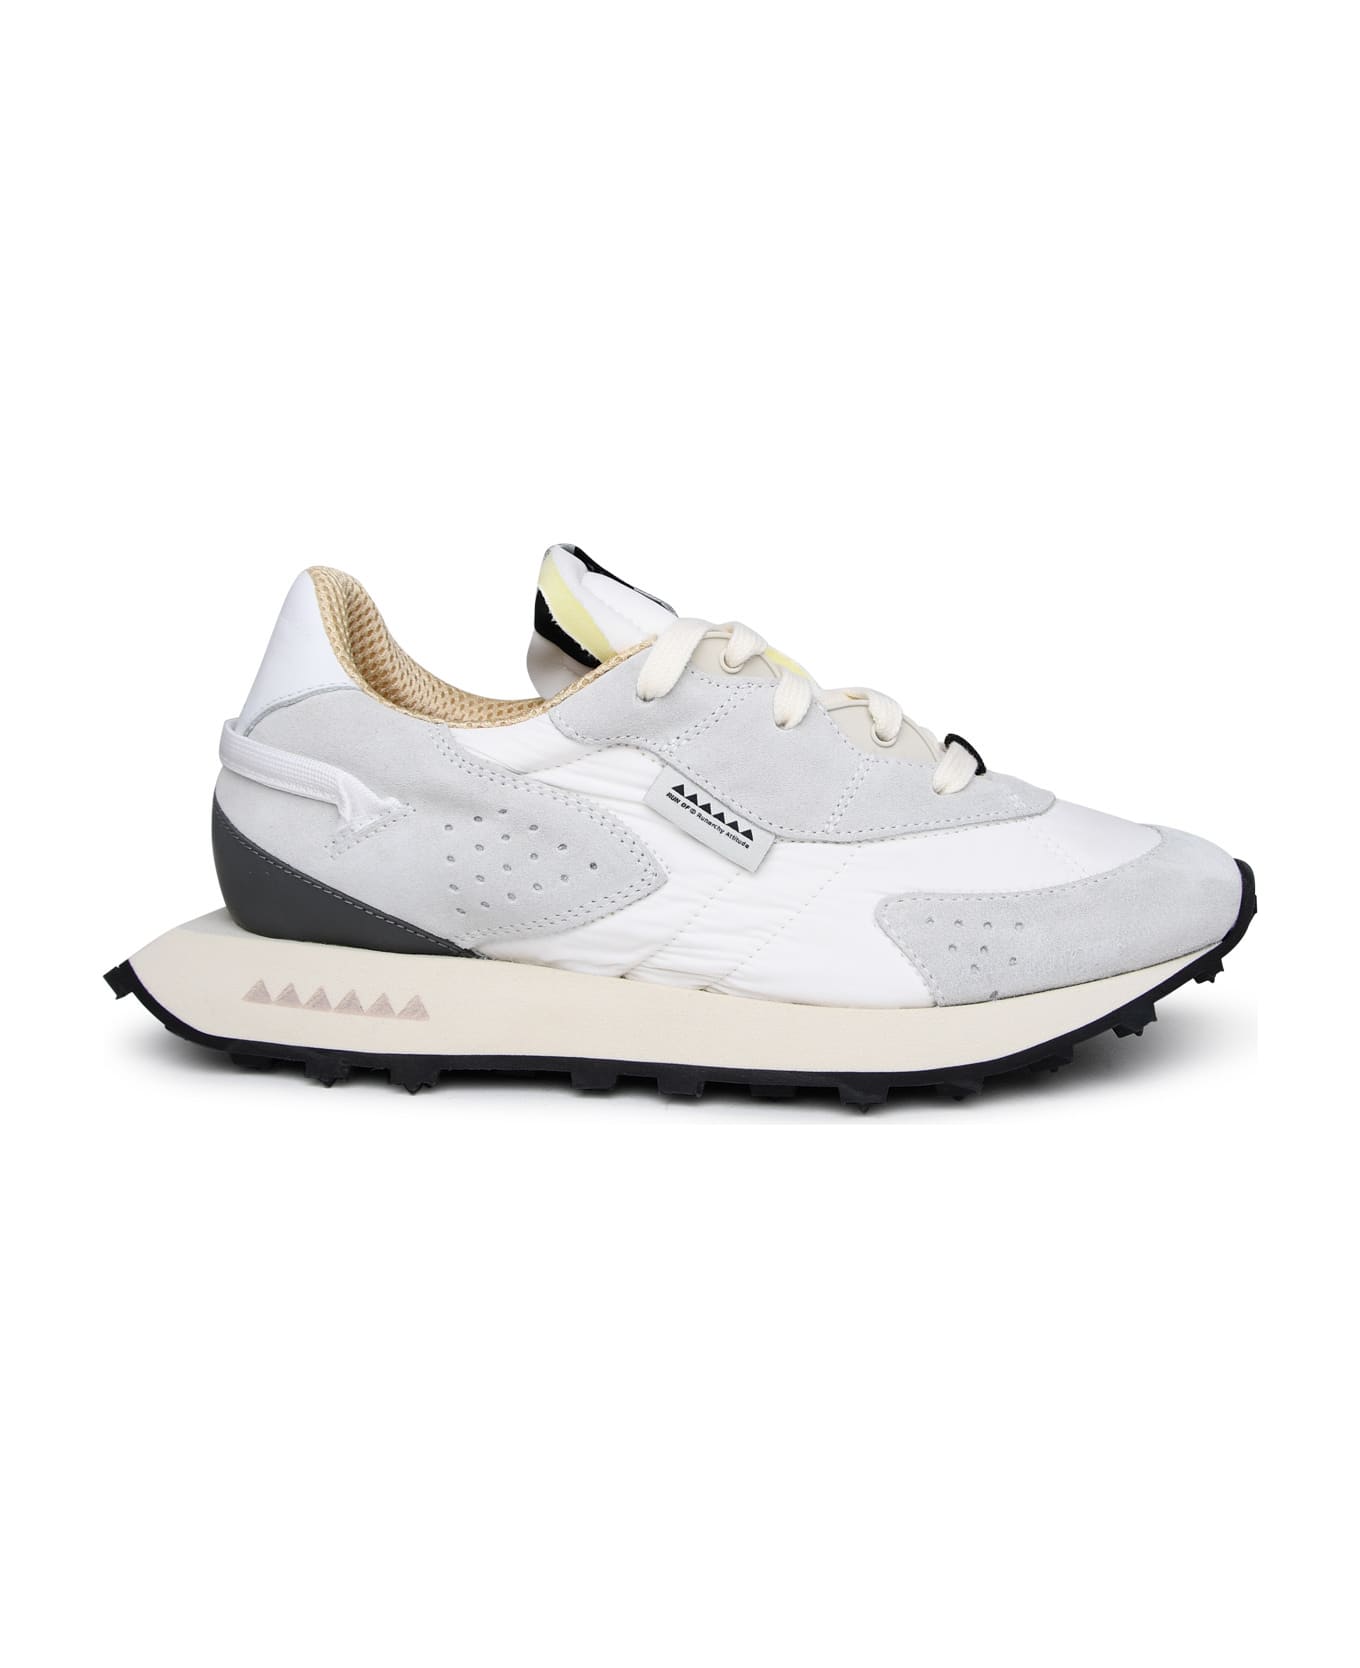 RUN OF Two-tone Suede Blend Sneakers - White